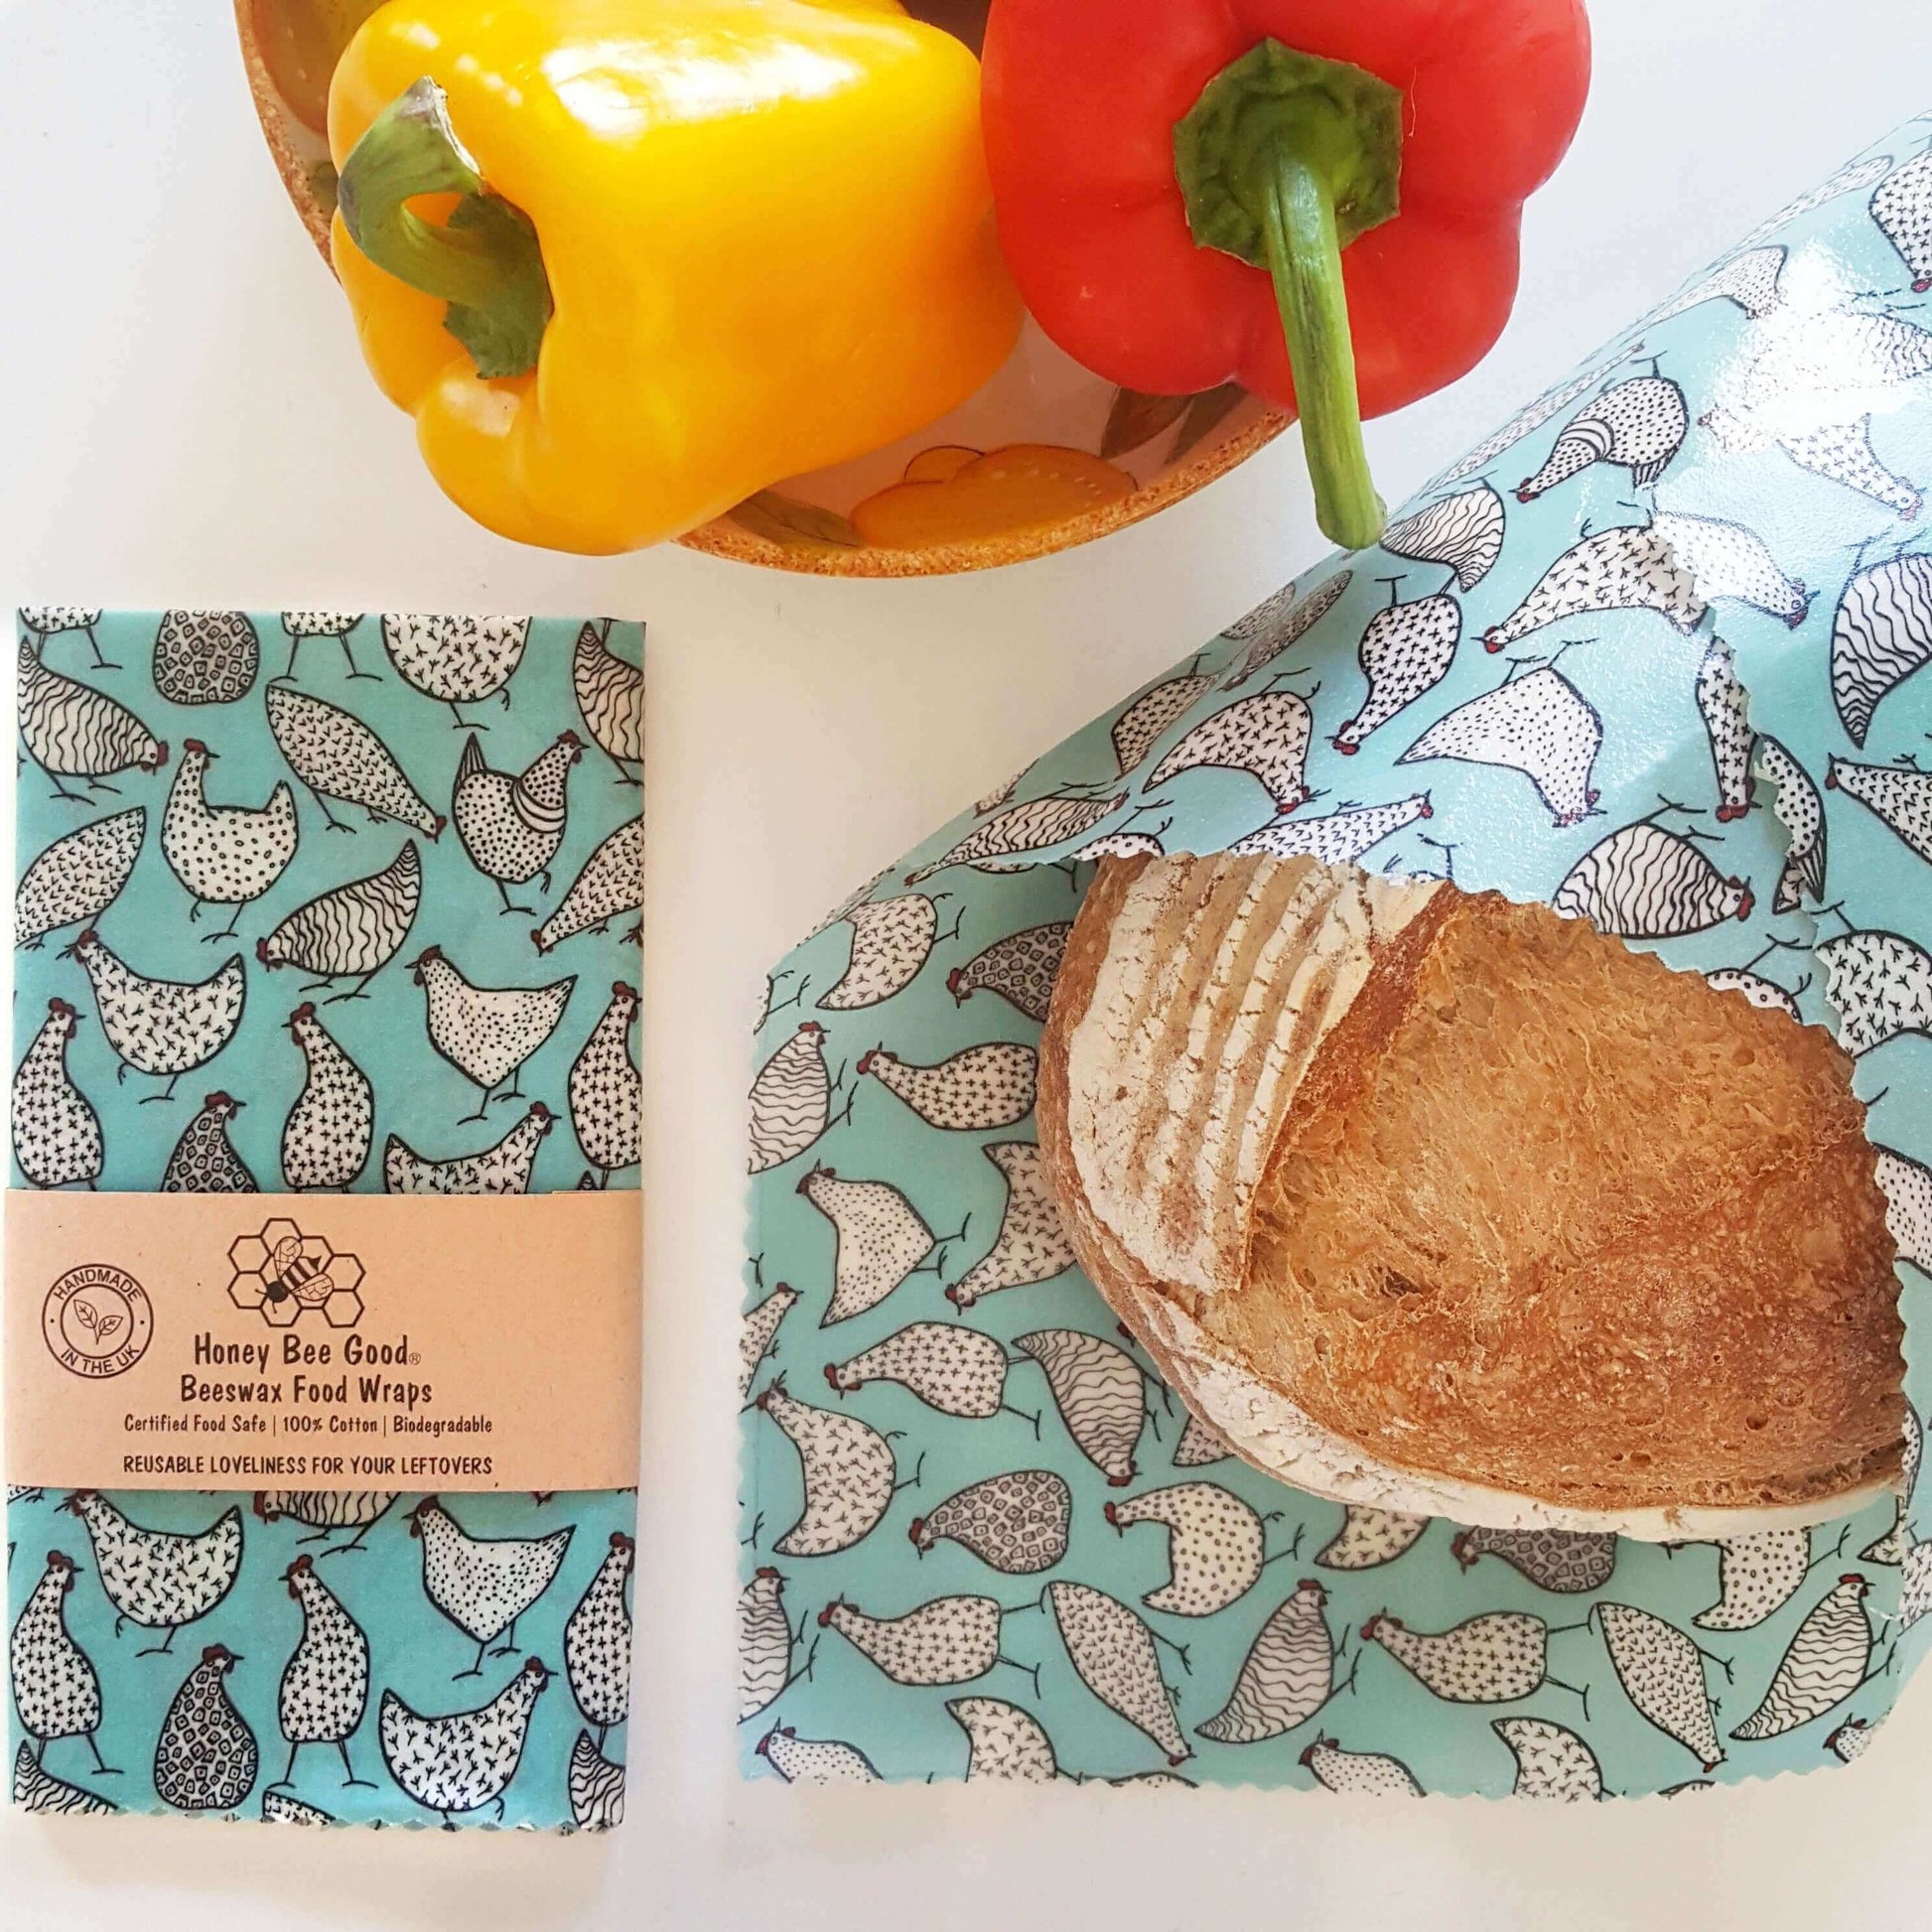 Reusable Beeswax Food Wraps 100% Hand Made in the UK by Honey Bee Good shown in Classic XXL Bread Wrap hens